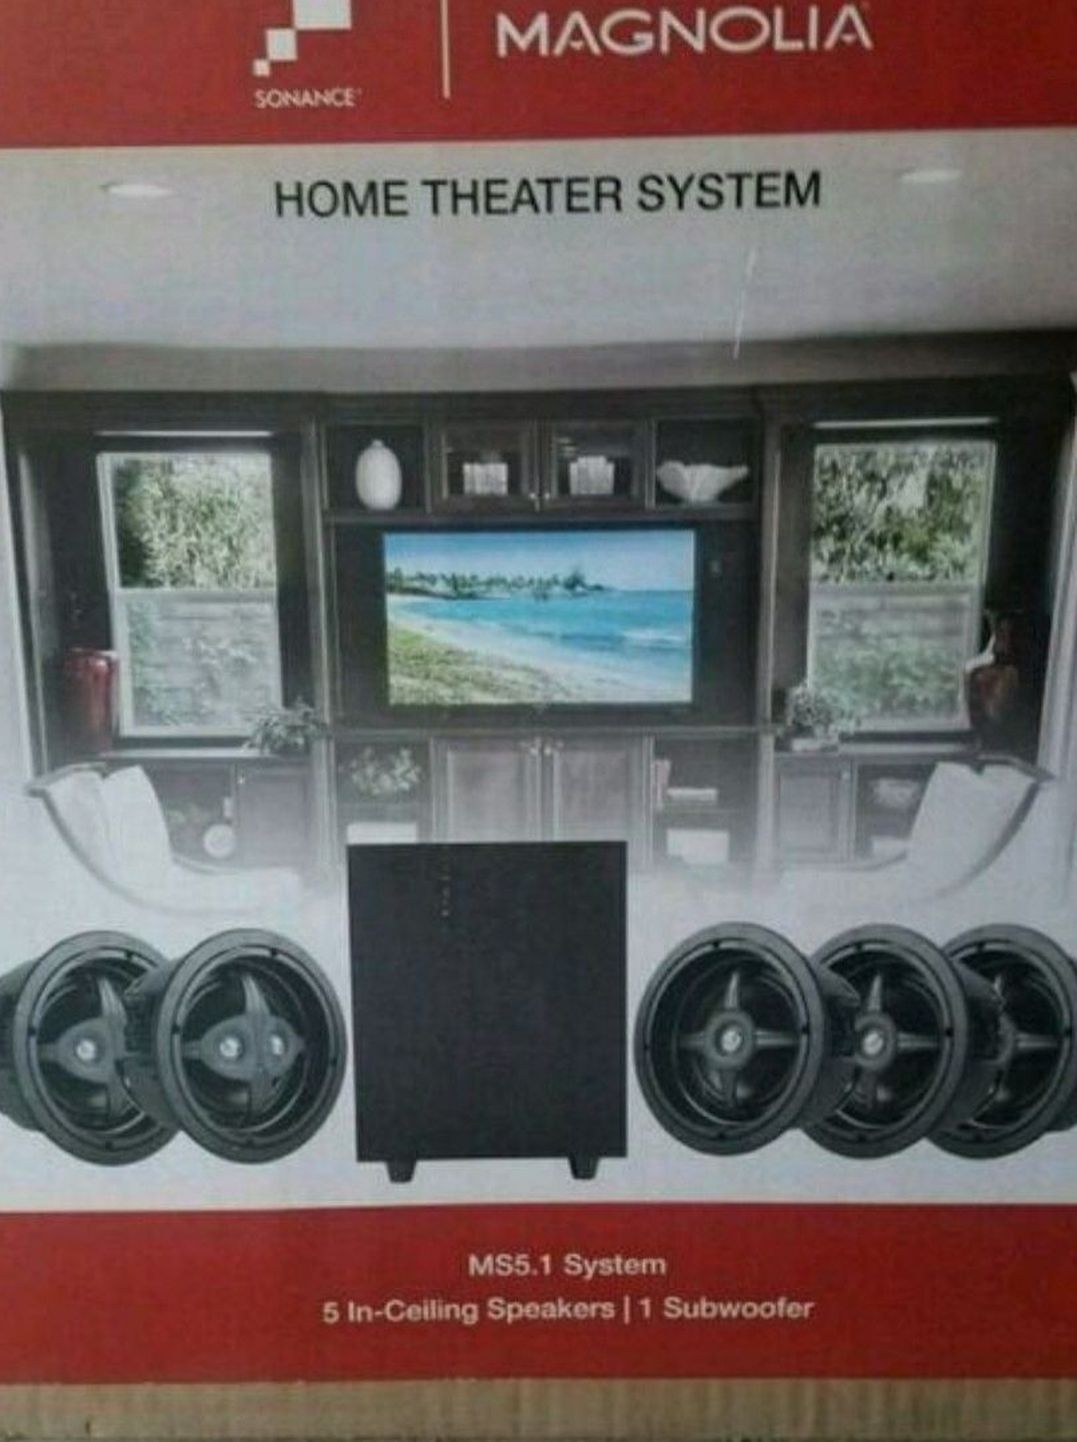 Magnolia Home Theater System